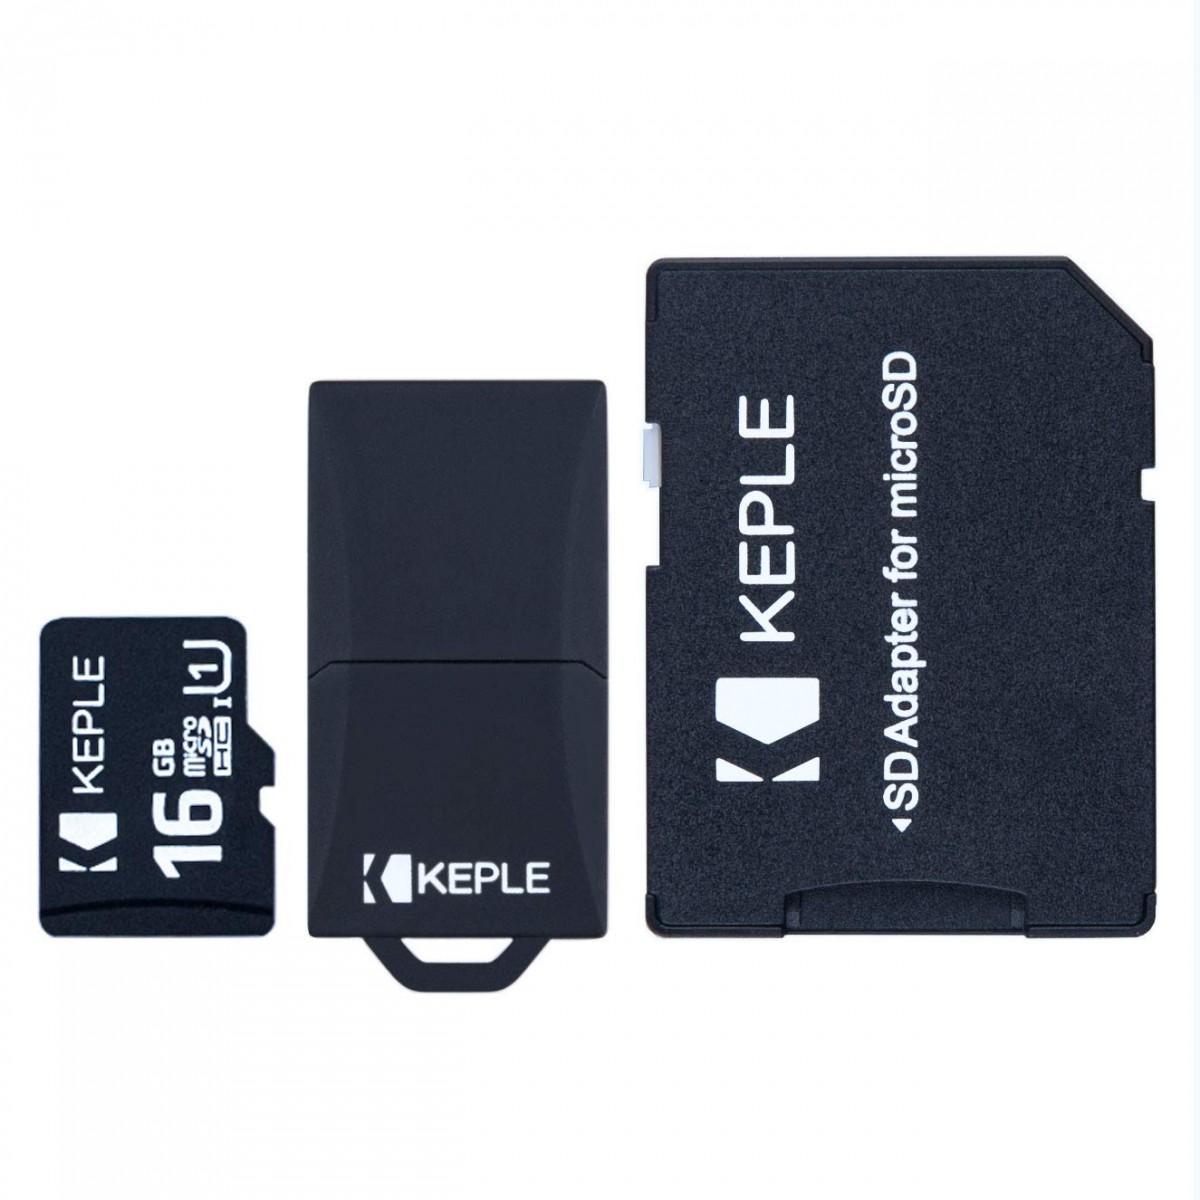 16gb Microsd Memory Card Micro Sd Class 10 Compatible With Nintendo Switch Wii Gaming Console 16 Gb Sdhc Class10 Sd And Usb Adapter Included Keple Com